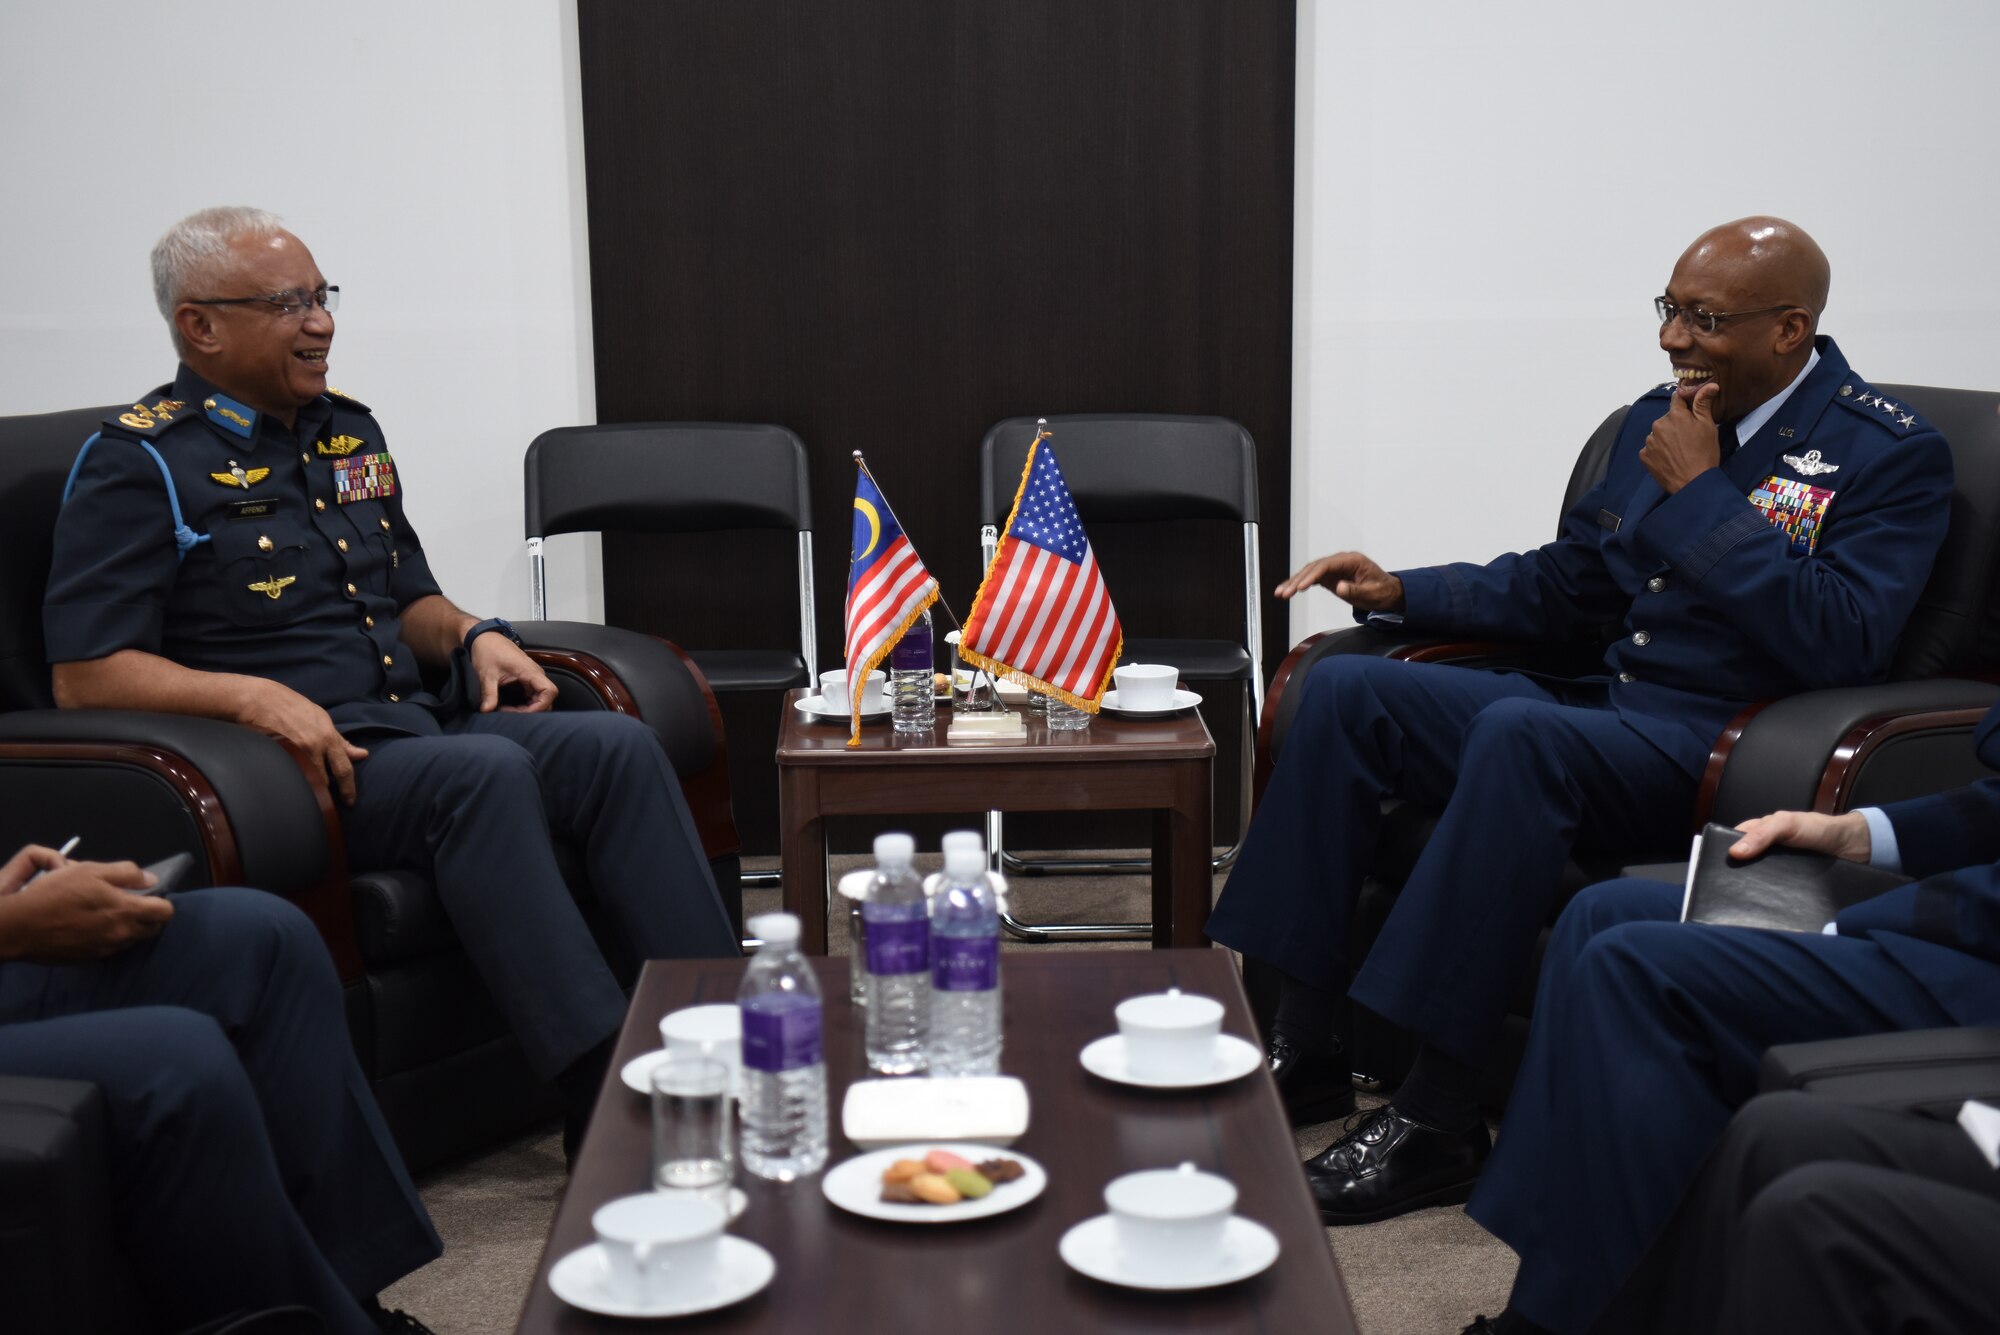 Gen. CQ. Brown, Jr., Pacific Air Forces commander,  meets with Gen. Dato ‘Sri Affendi, the Chief of Royal Malaysian Air Force, during a bilateral engagement at the Seoul International Aerospace and Defense Exhibition 2019 at the Seoul Airport, Republic of Korea, October 16, 2019. Seoul ADEX 19 offers a venue to enhance regional security through expanded military-to-military cooperation and with regional partners and allies.  (U.S. Air Force photo by Senior Airman Denise M. Jenson)